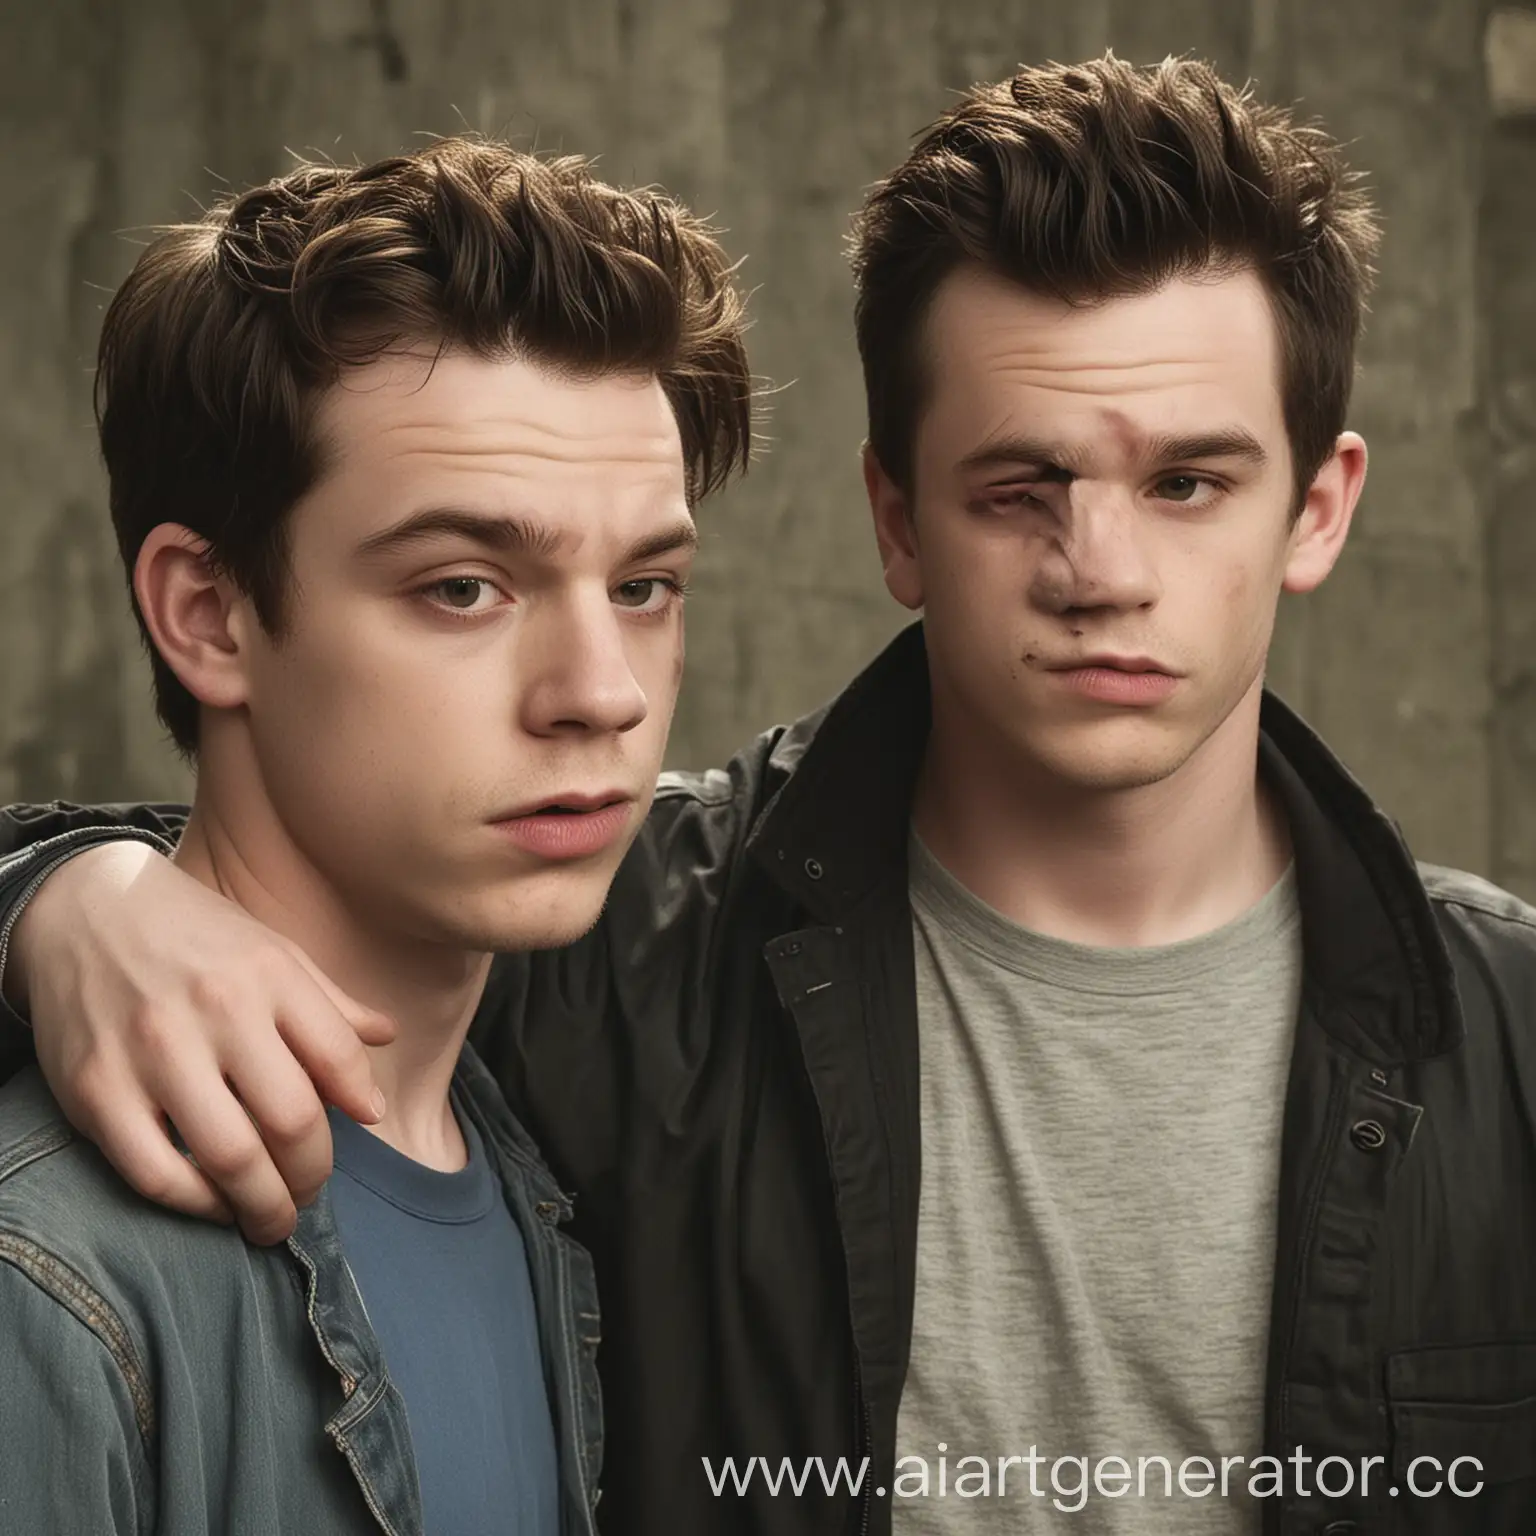 Ian-Gallagher-and-Mickey-Milkovich-from-Shameless-in-an-Urban-Setting